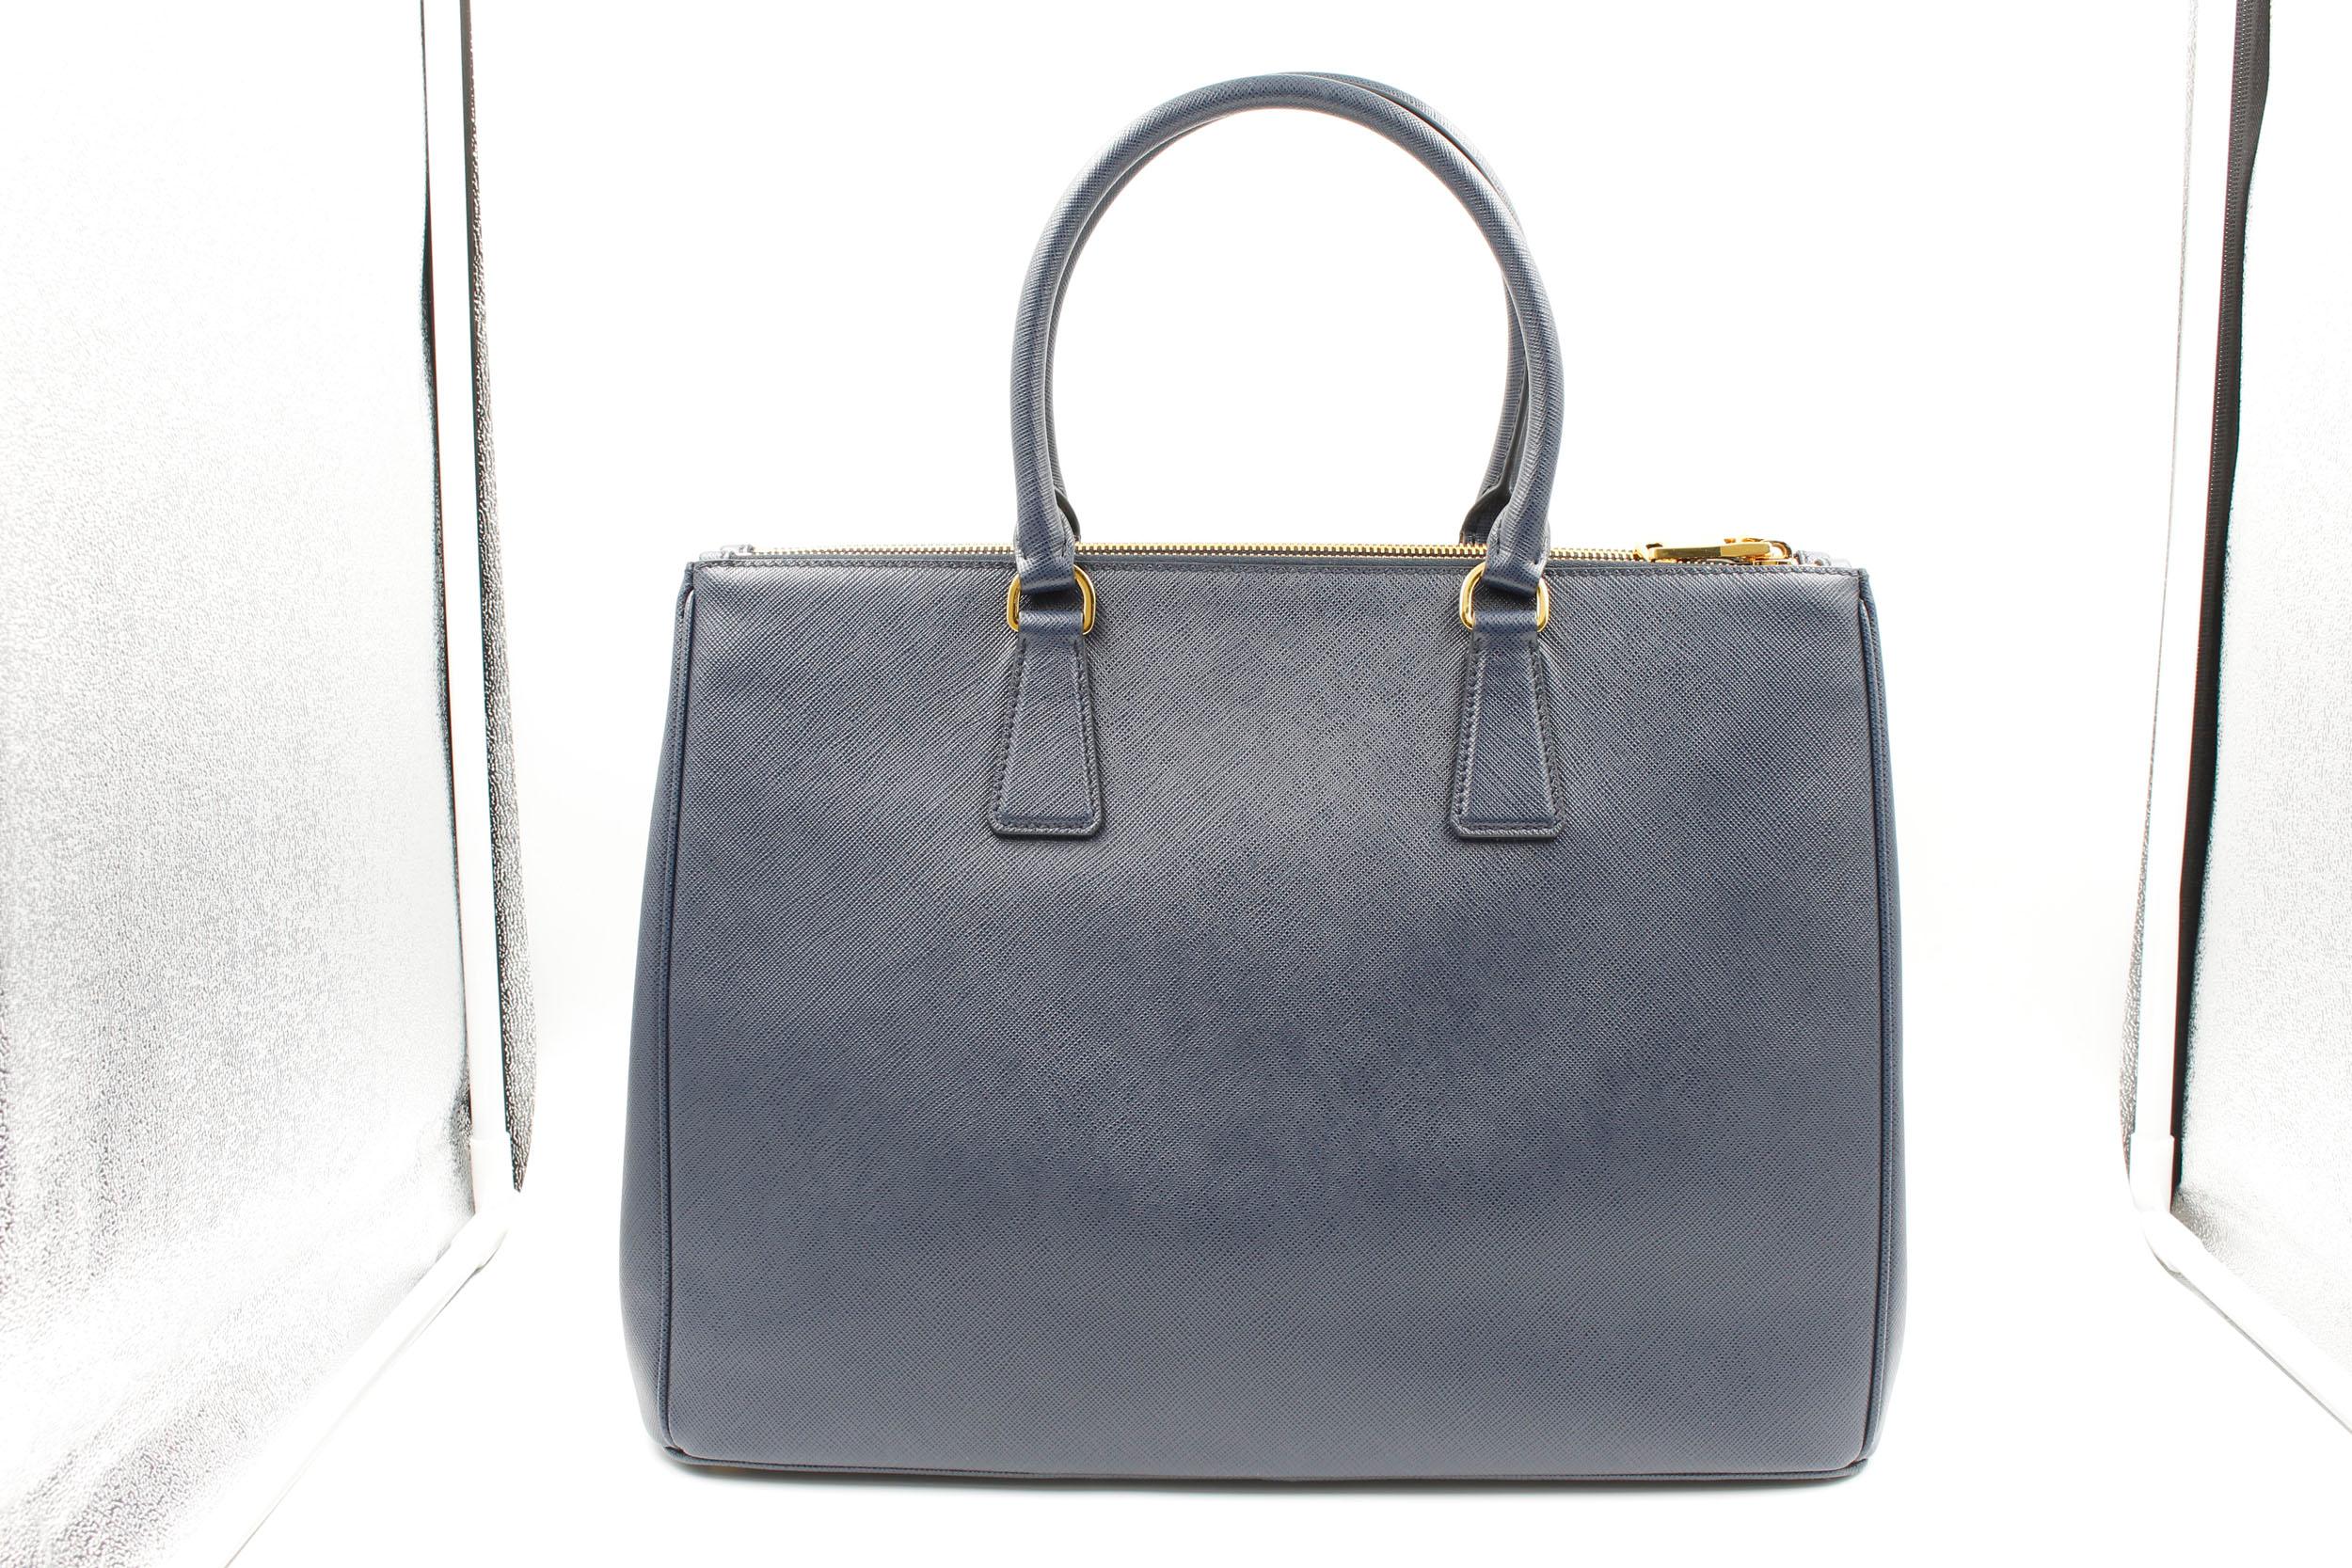 Prada's Galleria Saffiano tote is a perfectly prim addition to your accessories edit. Crafted from textured navy blue calf leather, this design is finished with dainty top handles and golden hardware. Double storage compartments leave ample room for